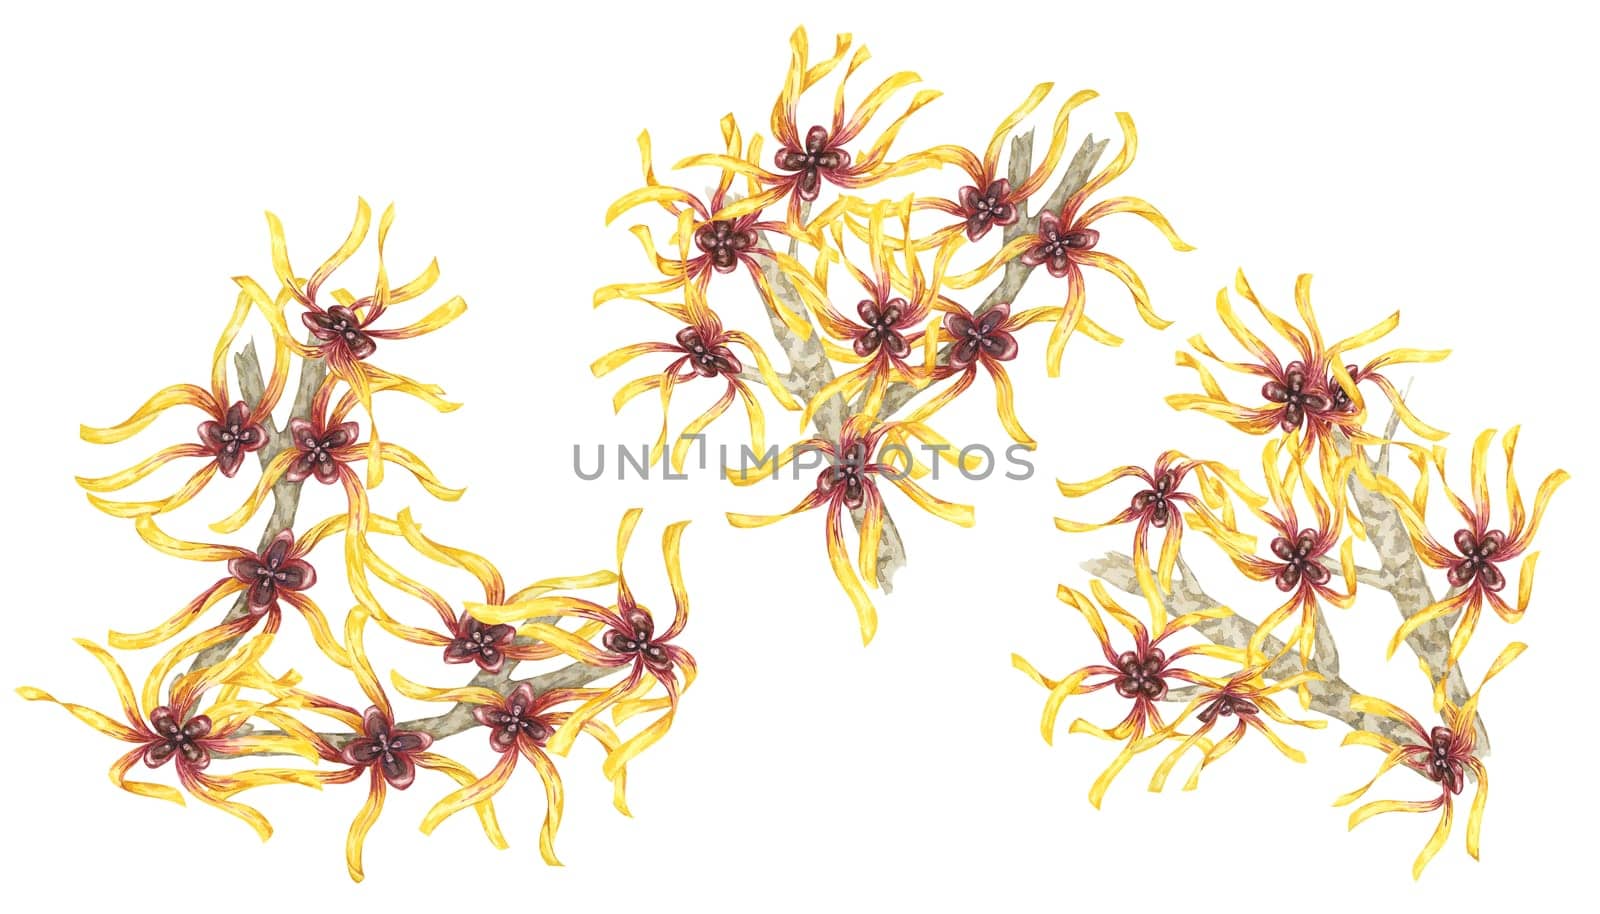 Witch hazel flowers on tree branch set of cliparts. Hamamelis virginiana twigs. Watercolor illustration for herbal medicine, beauty packaging, water by Fofito